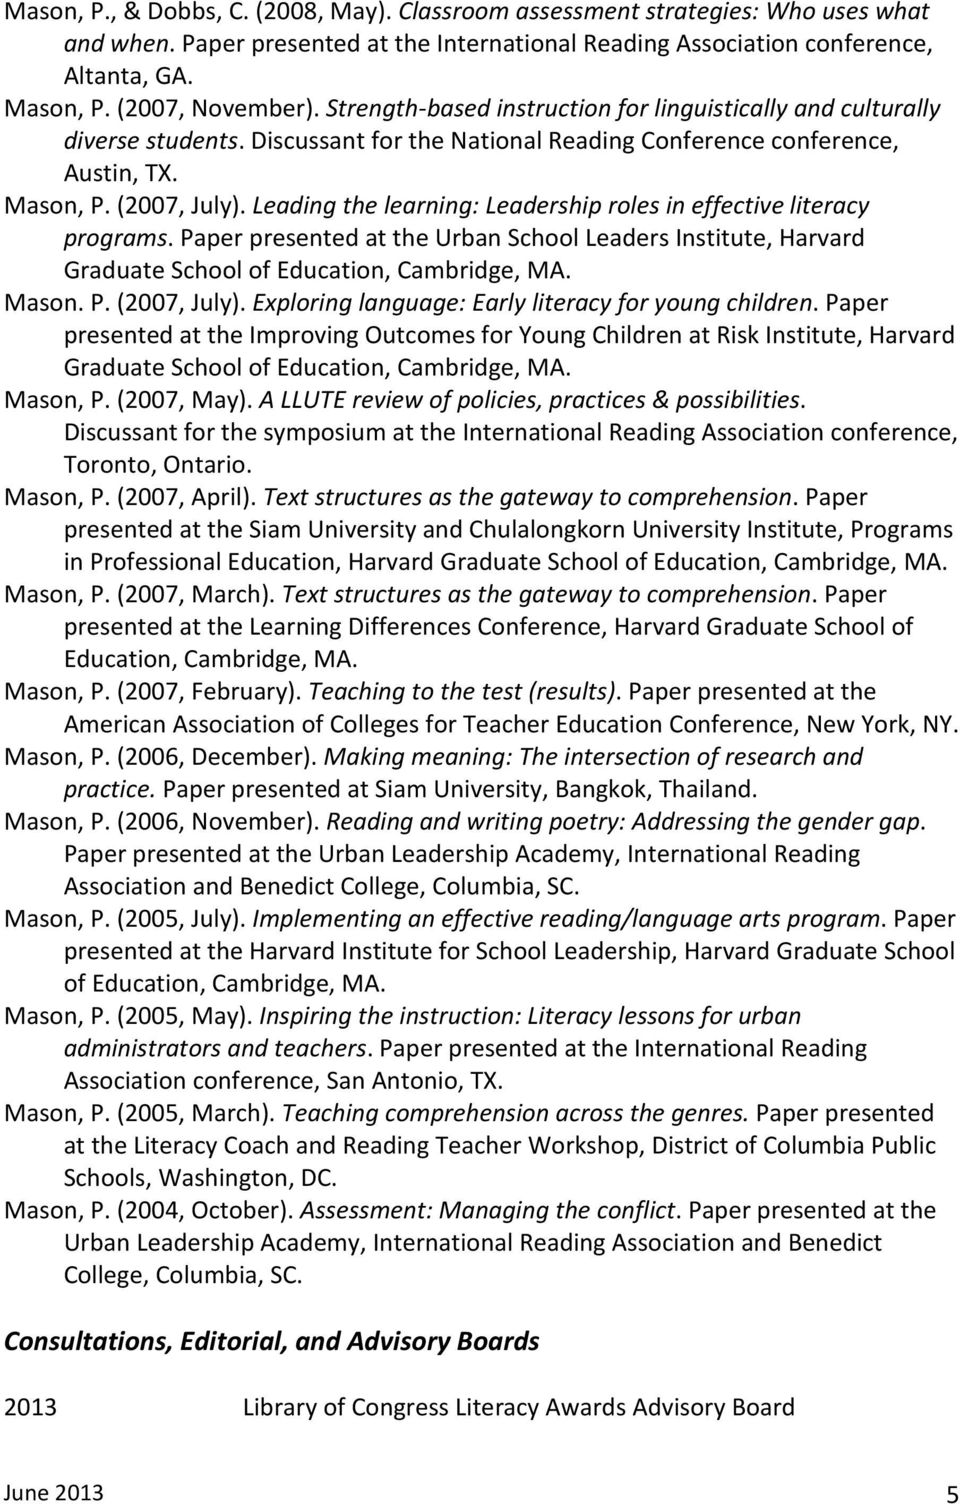 Leading the learning: Leadership roles in effective literacy programs. Paper presented at the Urban School Leaders Institute, Harvard Graduate School of Education, Cambridge, MA. Mason. P. (2007, July).